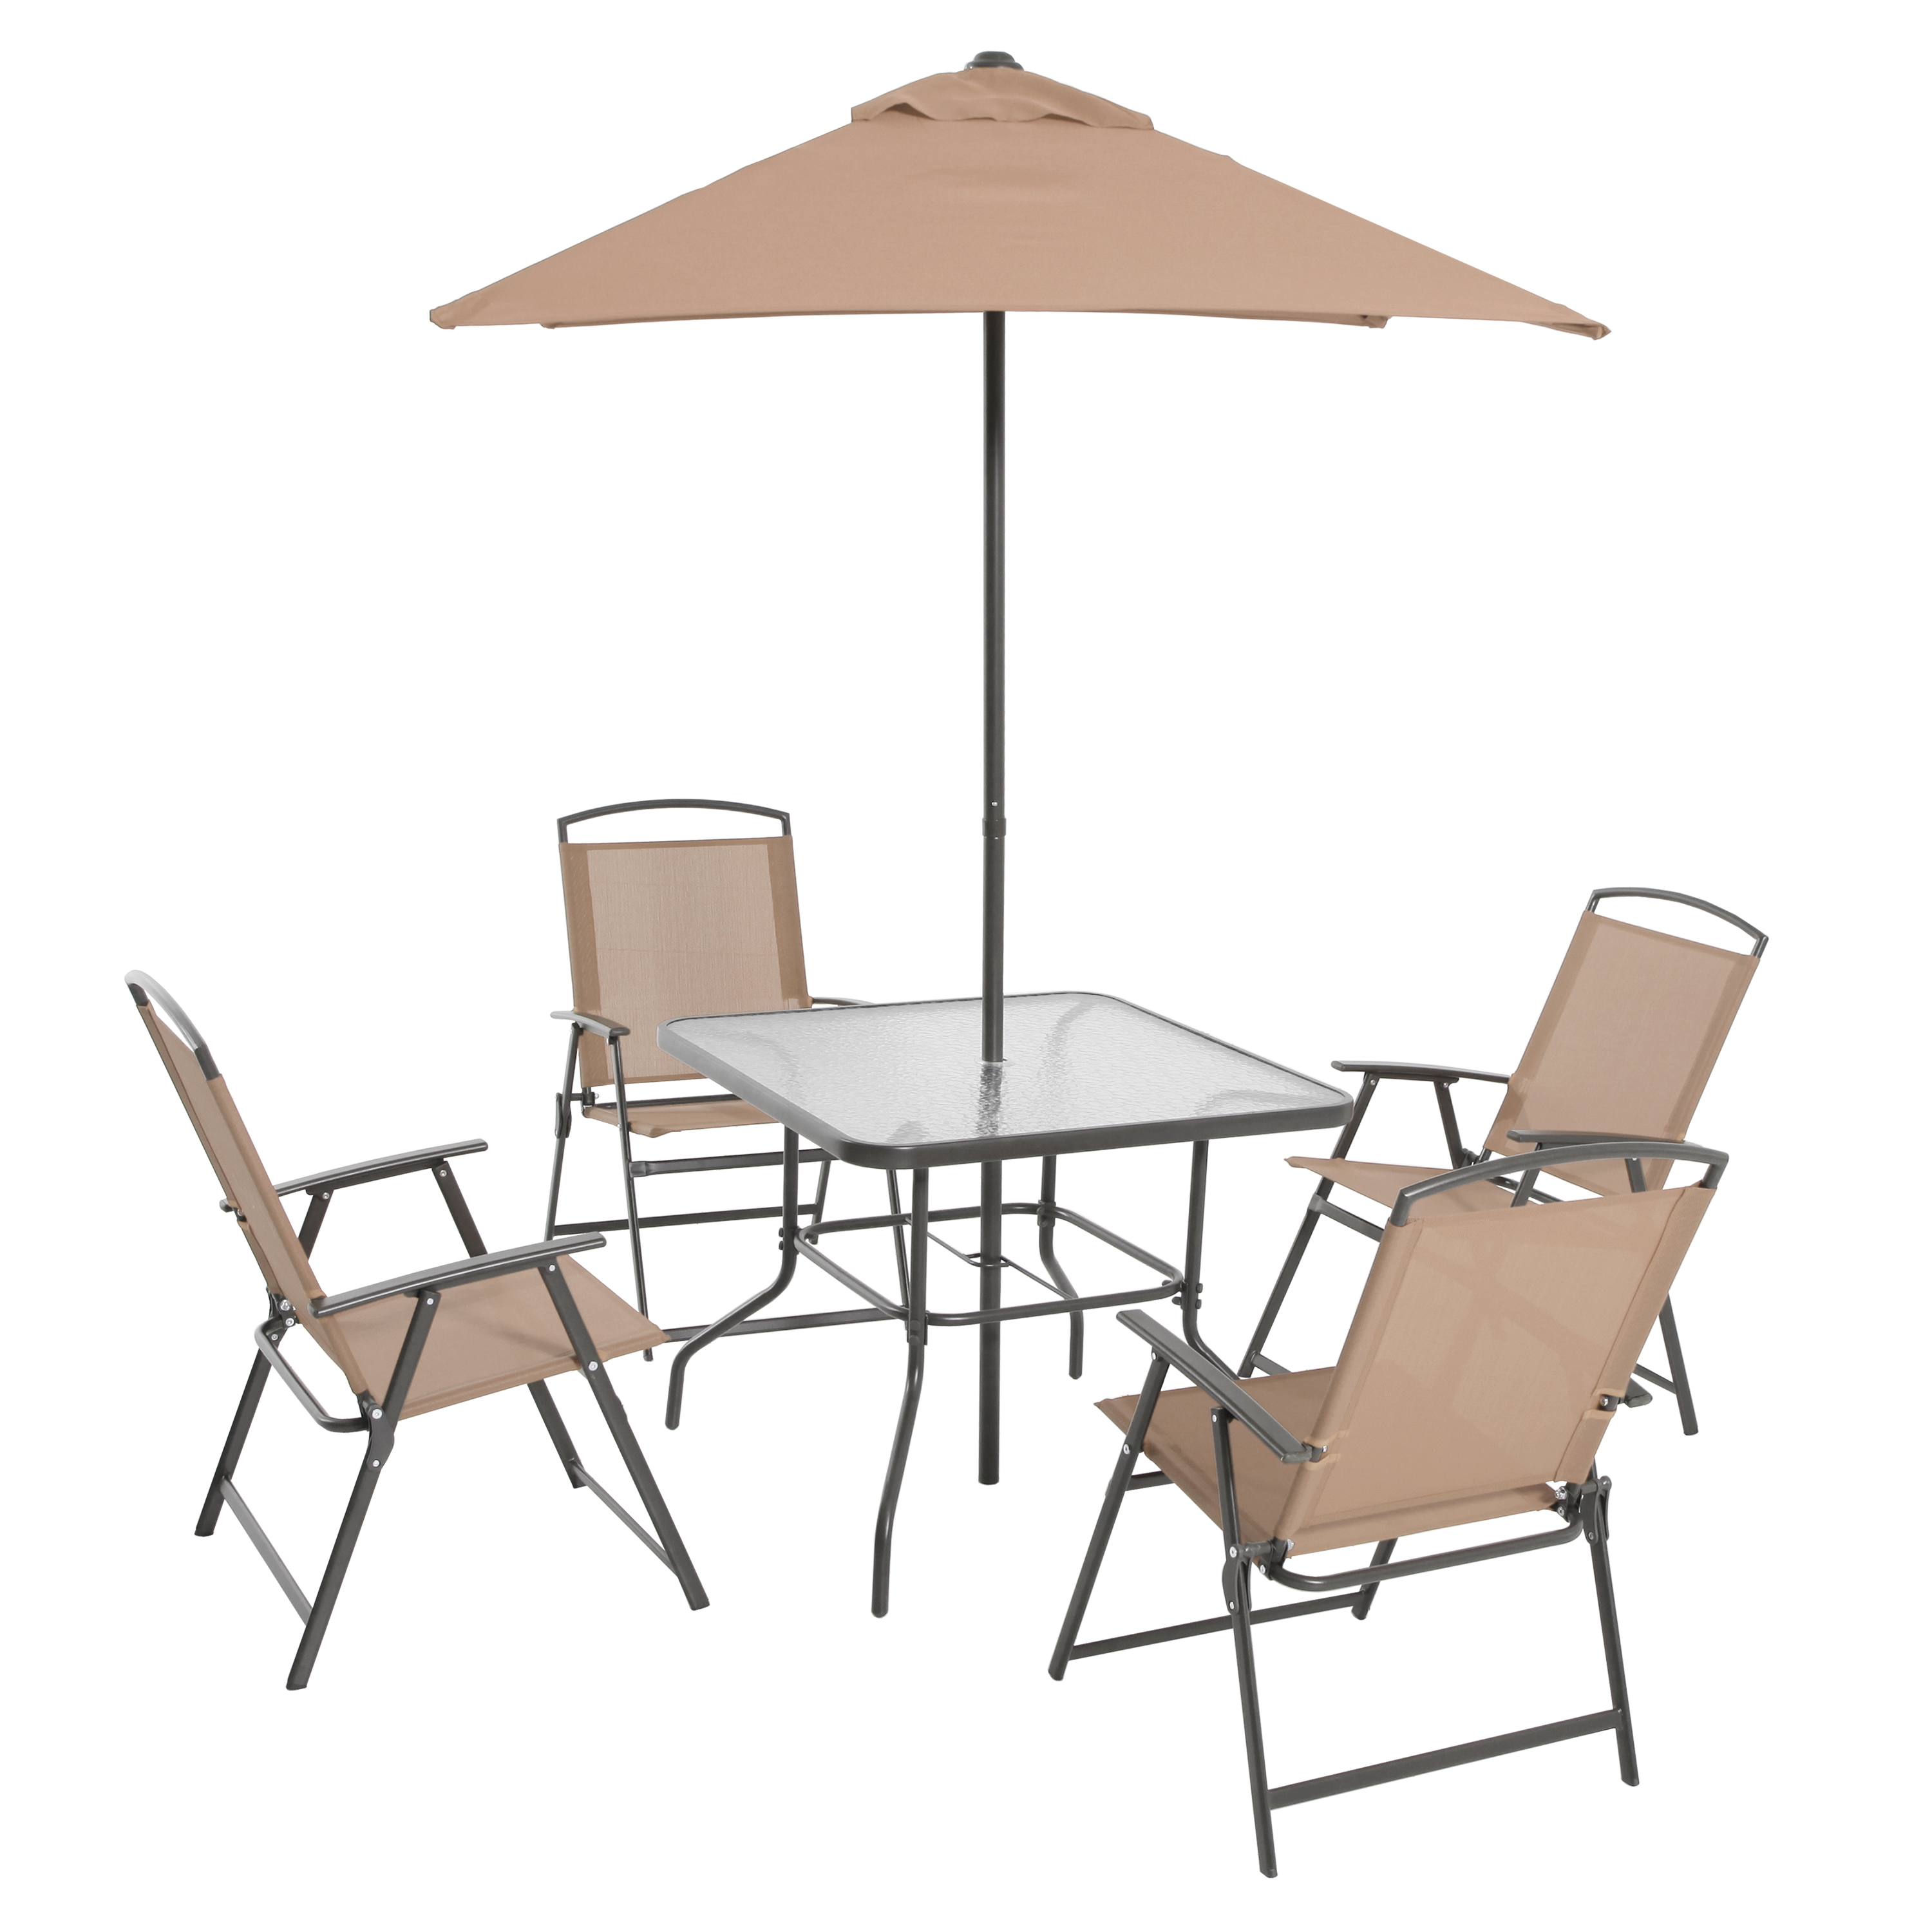 Mainstays Albany Lane Steel Outdoor Patio Dining Set of 6, Tan - image 3 of 13